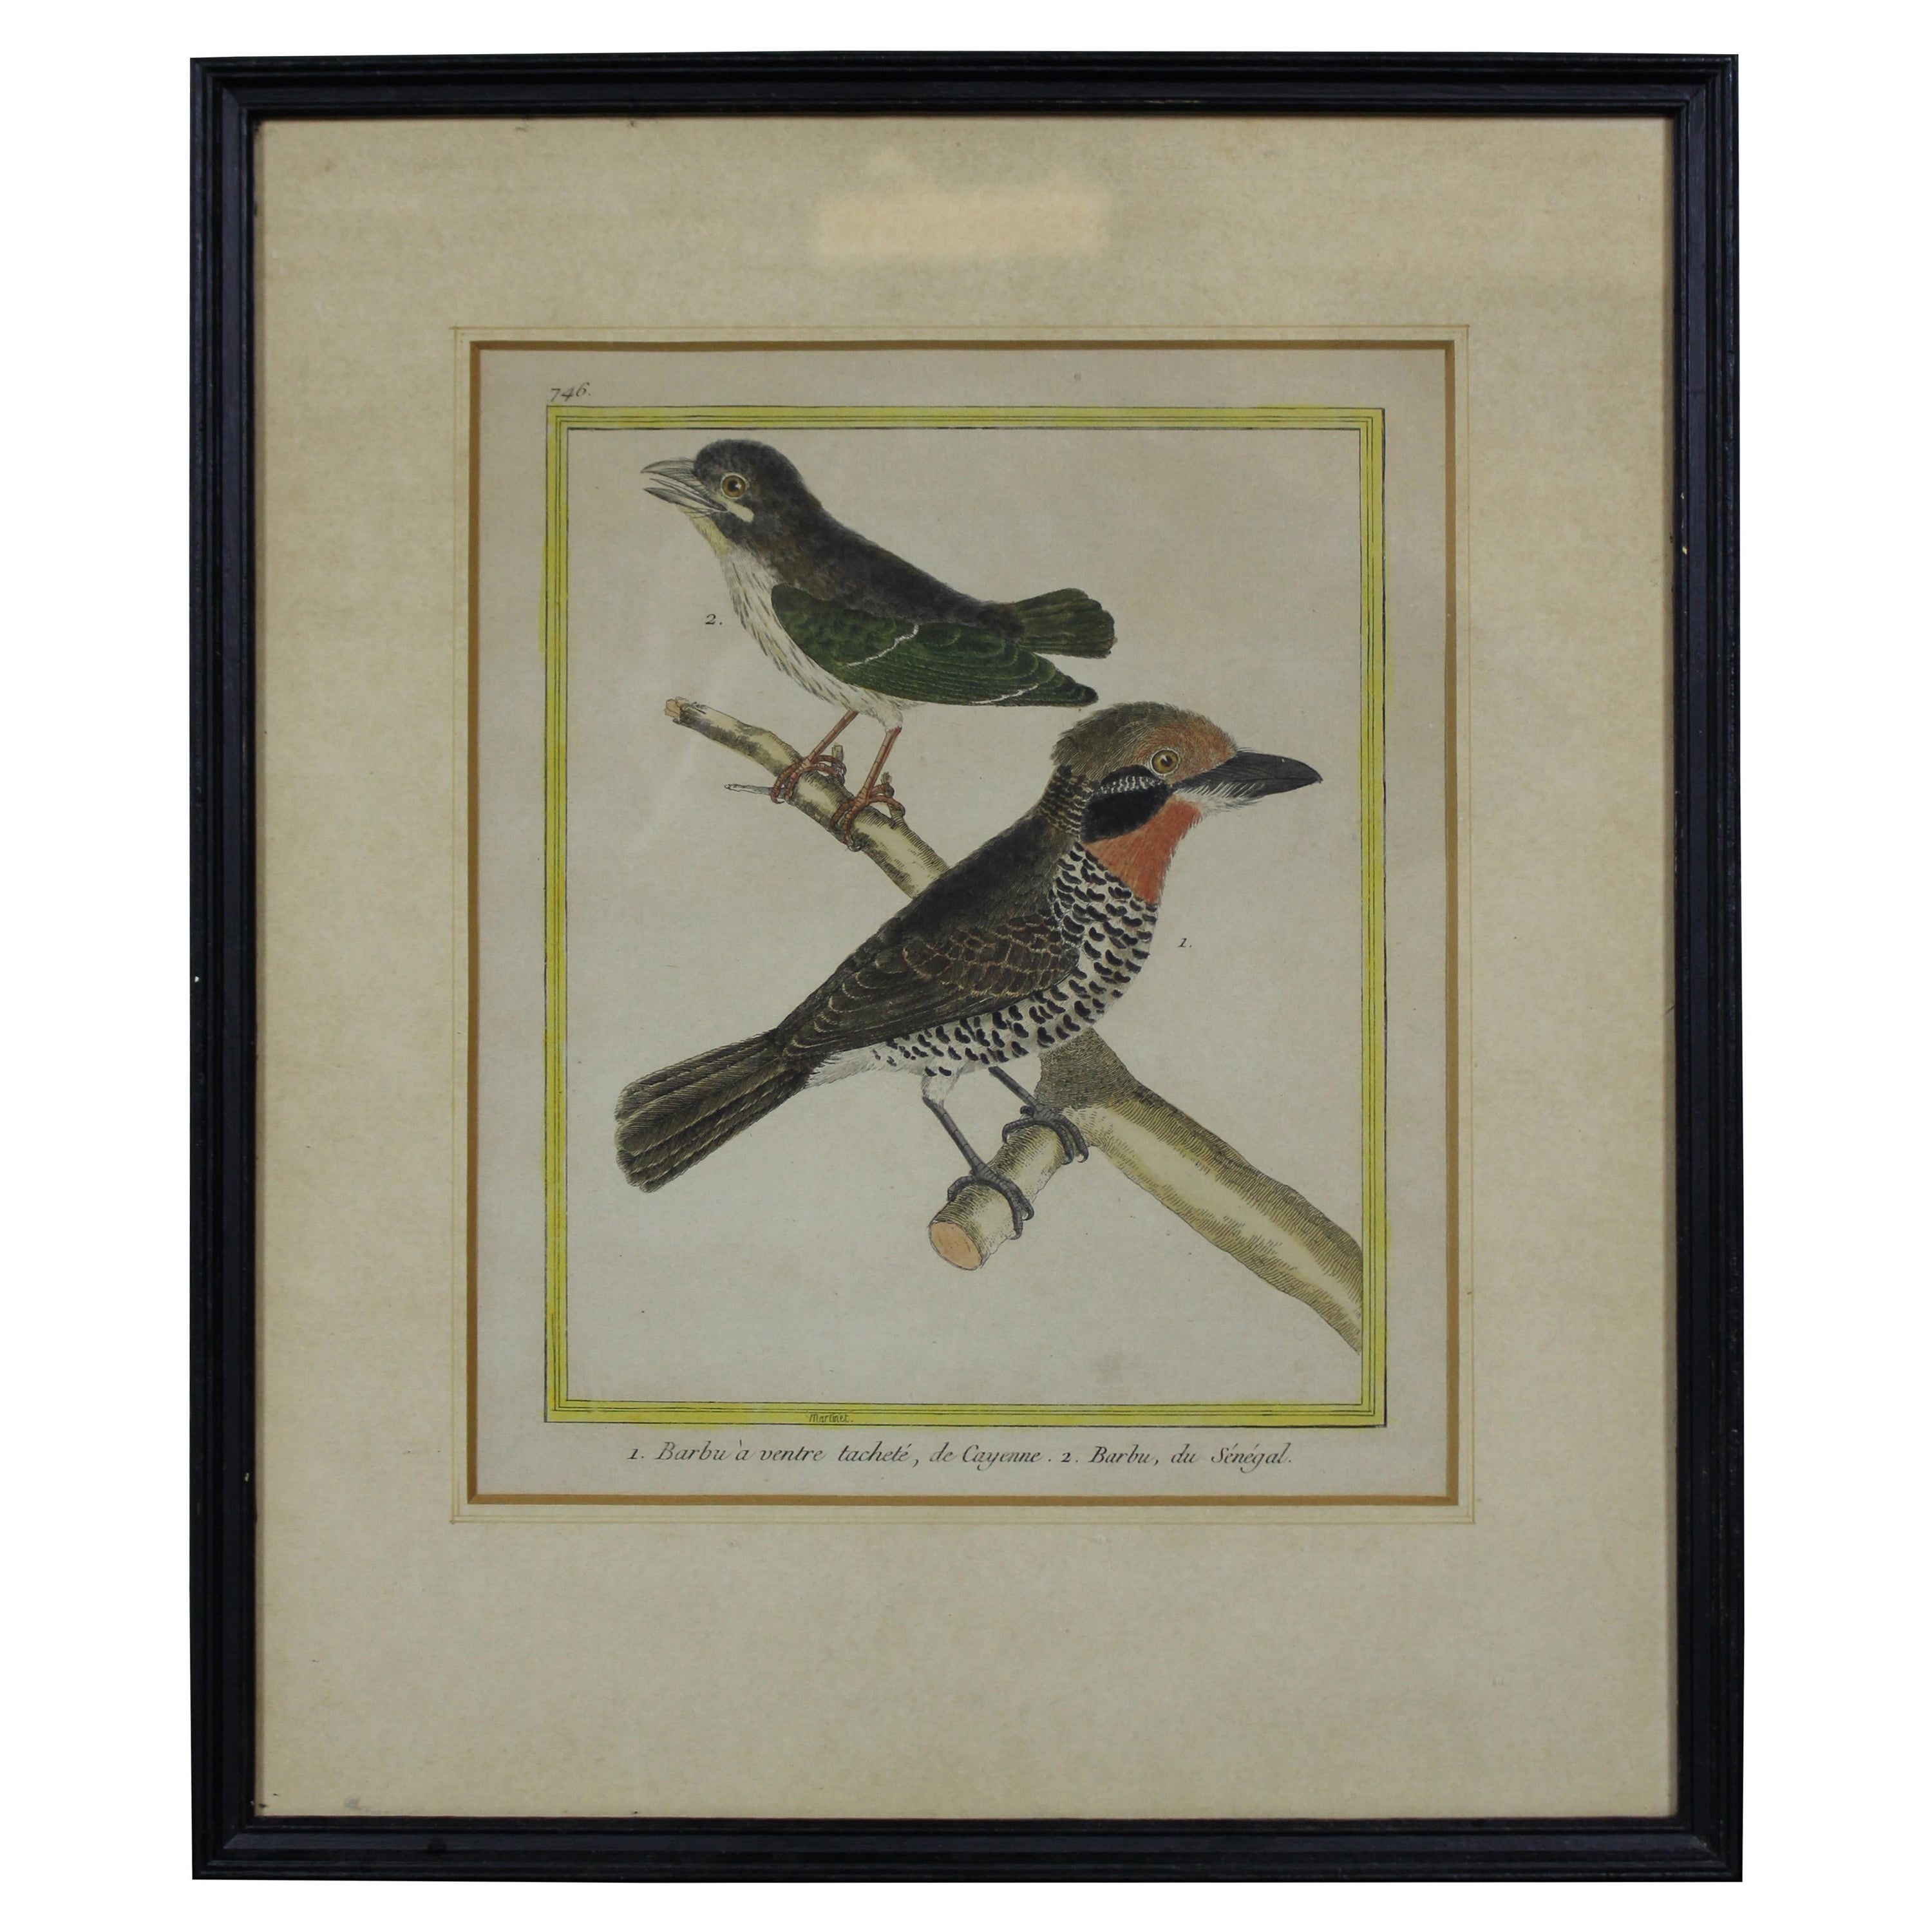 Antique French 18th C. Francois Martinet Colored Tropical Bird Engravings Framed